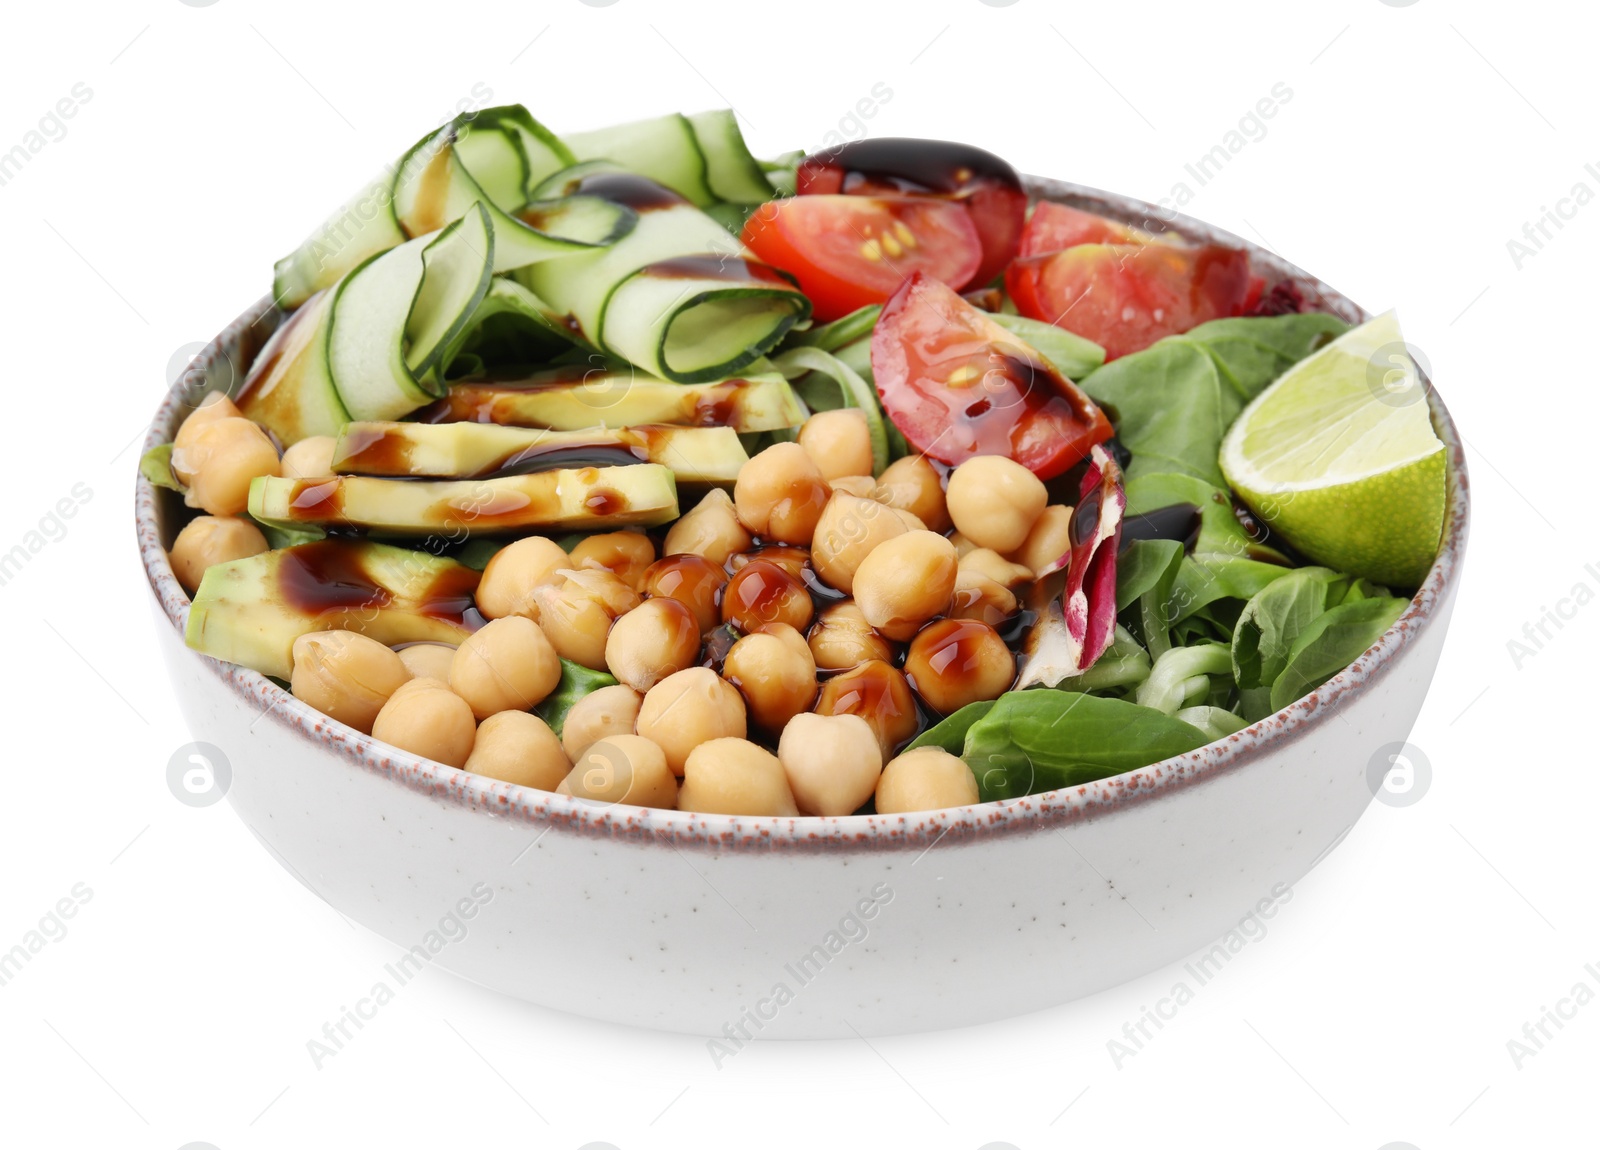 Photo of Delicious salad with chickpeas, vegetables and balsamic vinegar in bowl isolated on white